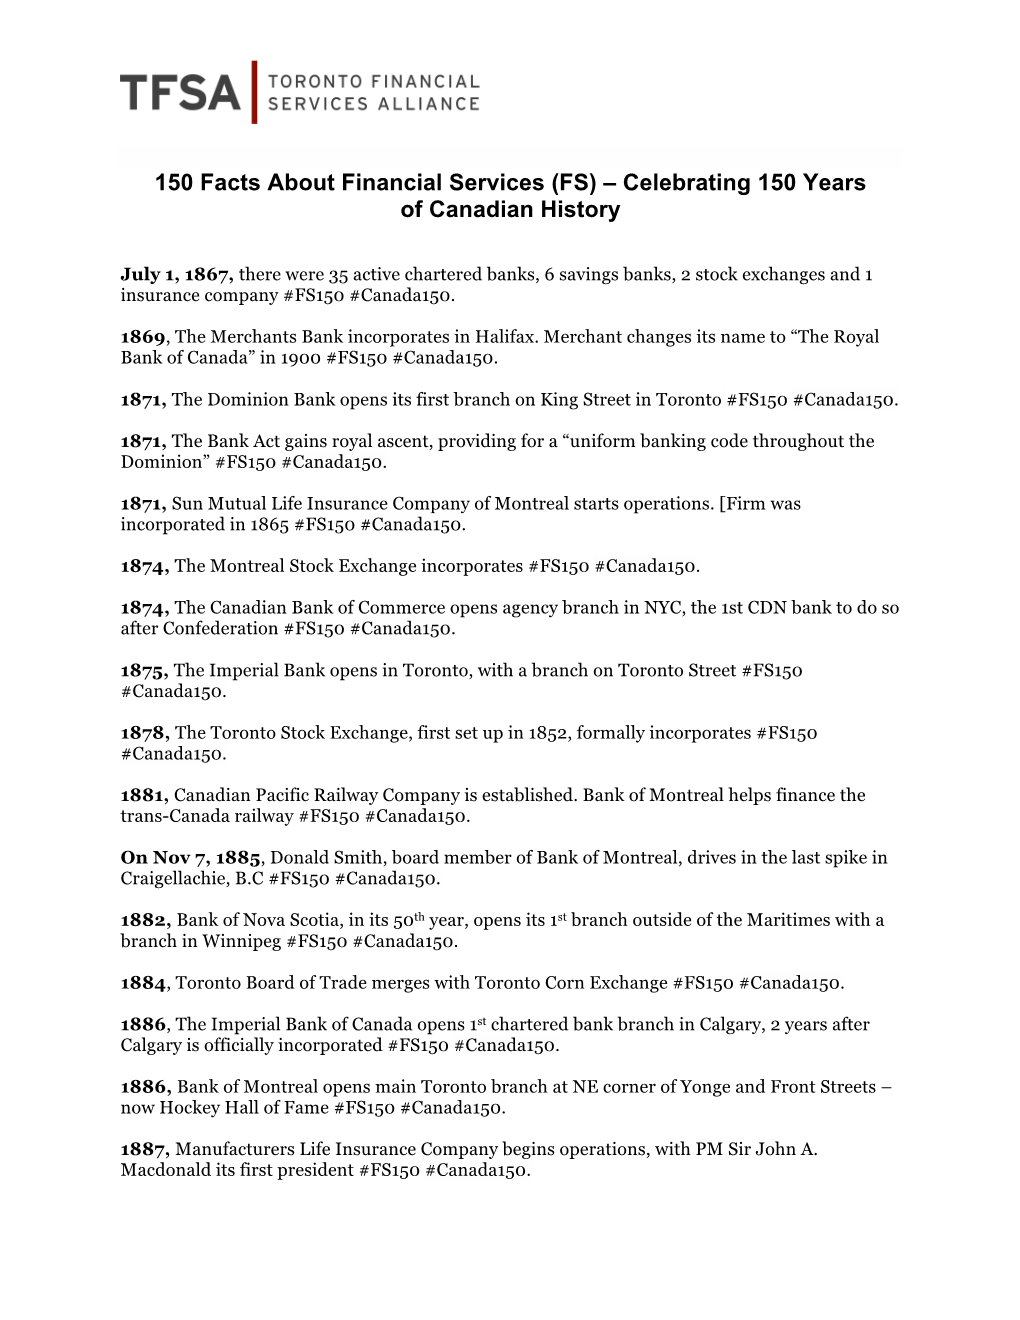 TFSA 150 Facts